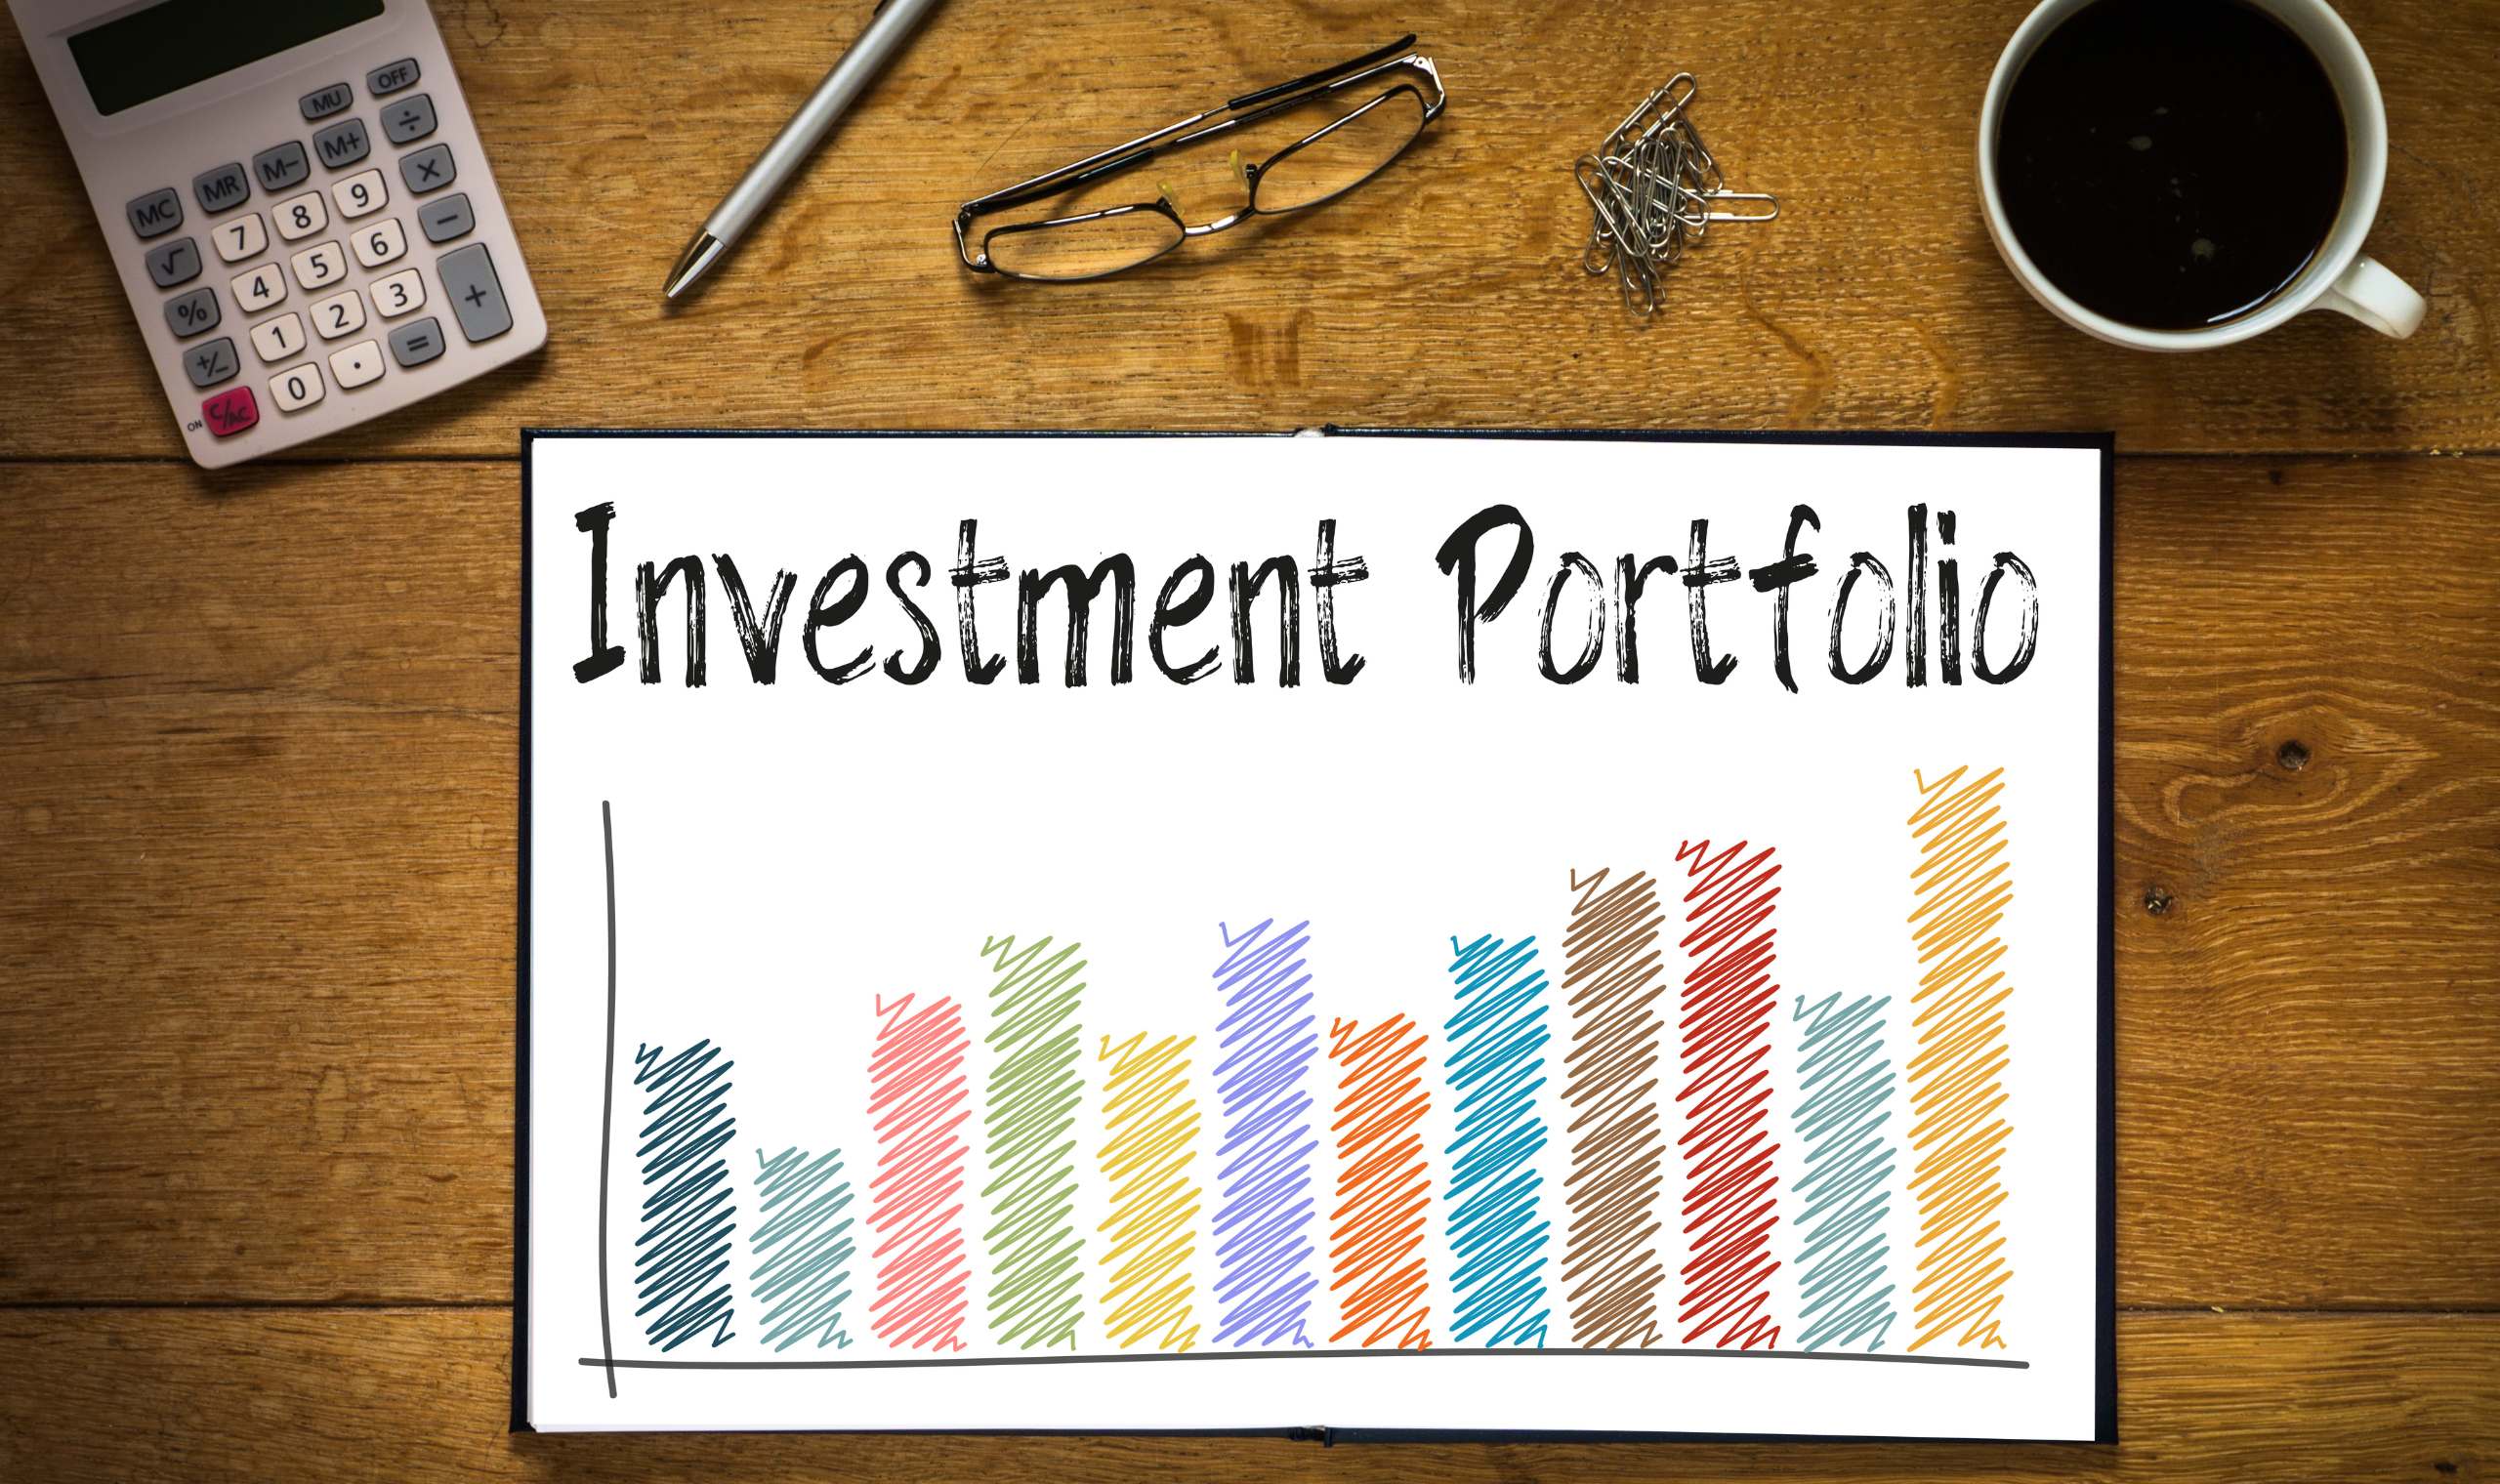 Investment Portfolio: Significance of Ownership Extent